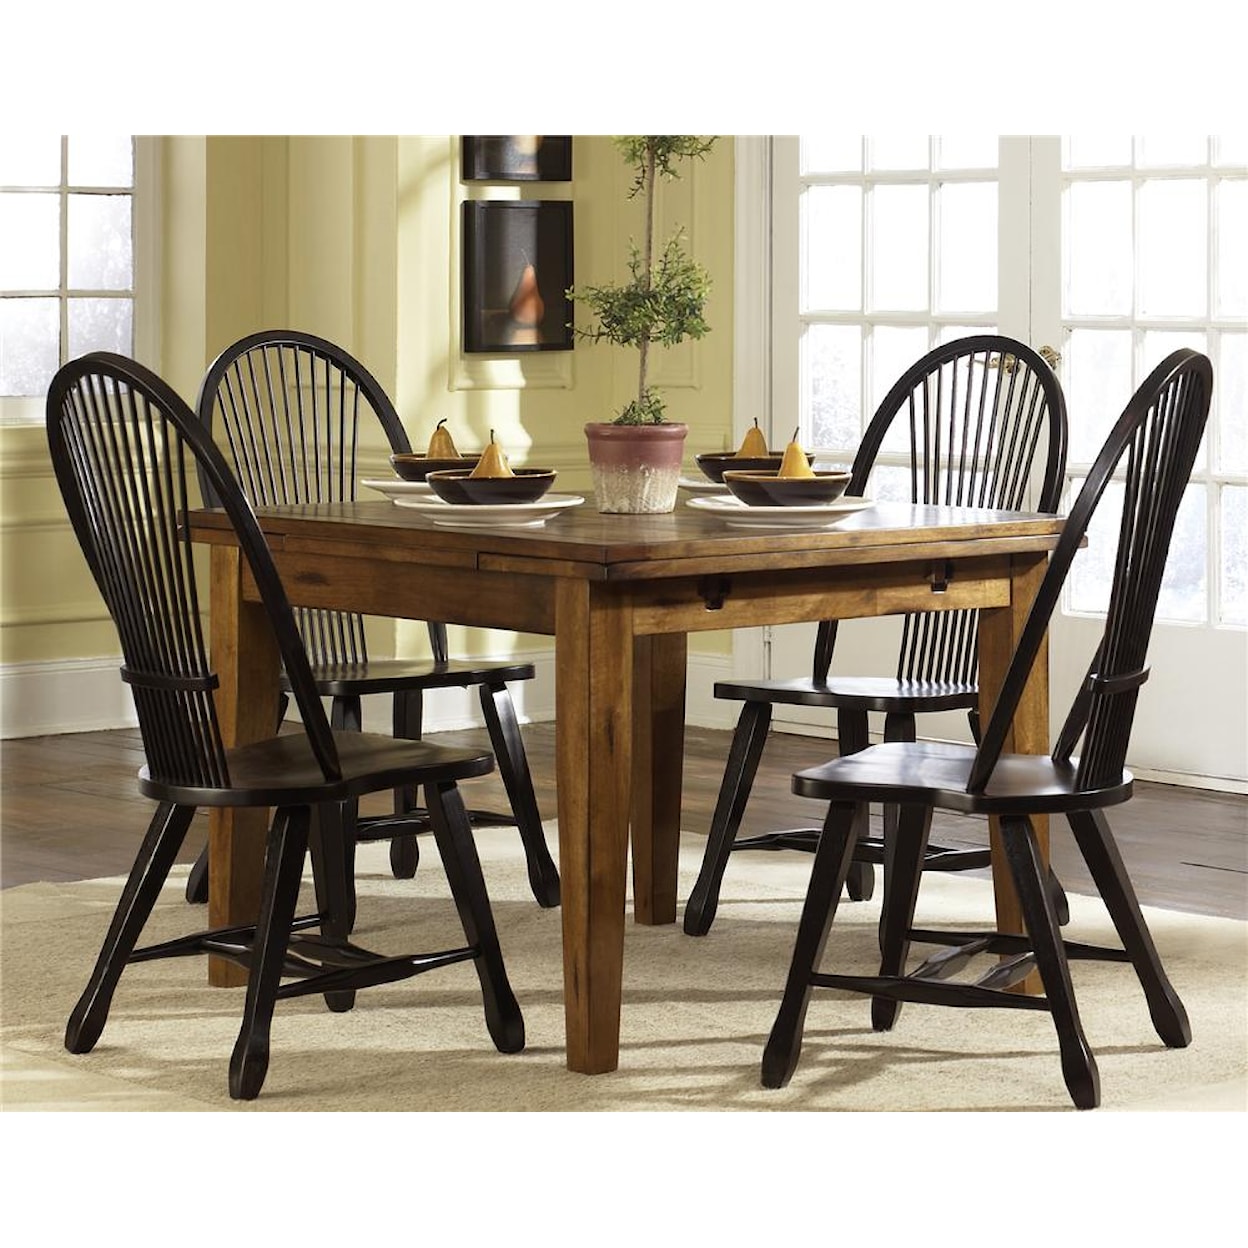 Liberty Furniture Treasures 17 5-Piece Table & Chair Set